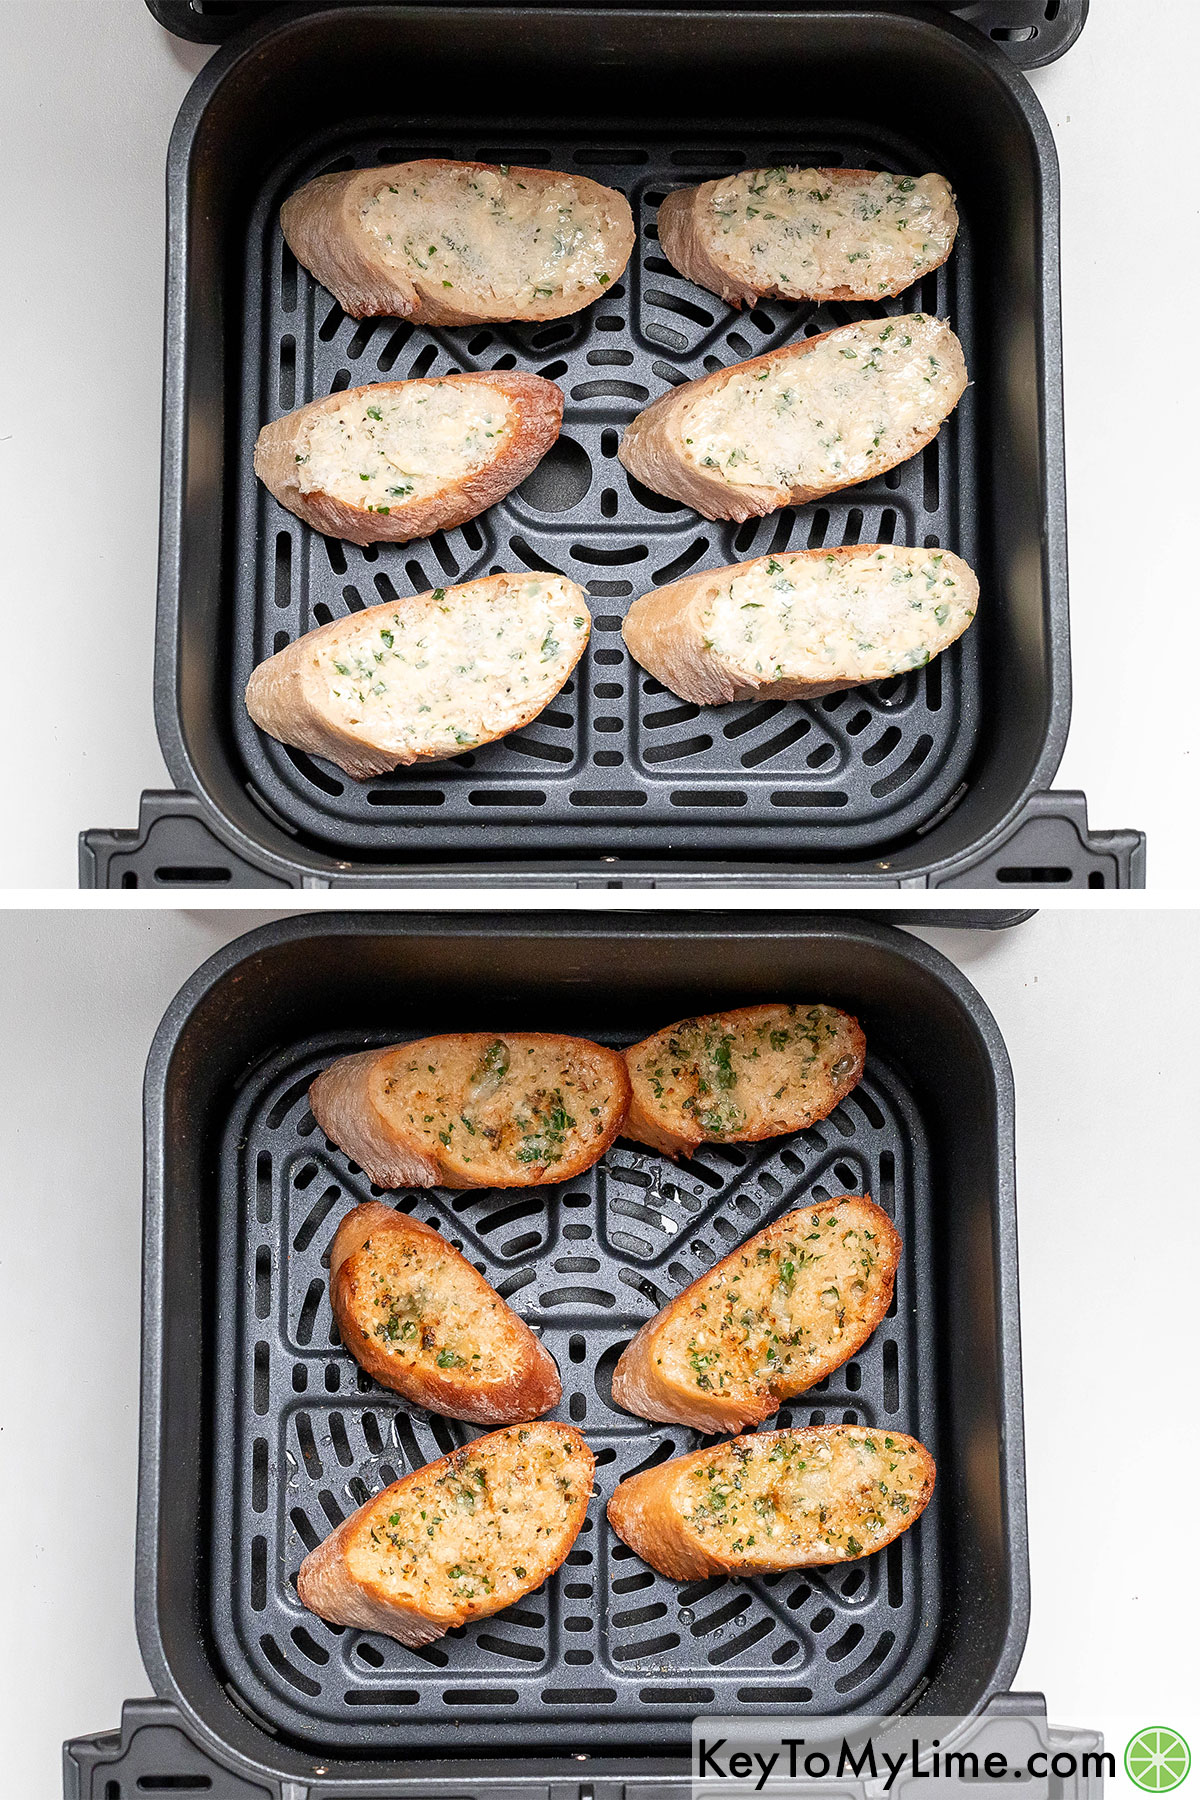 Cooking the garlic bread in the air fryer for five minutes or until a golden texture has been achieved.